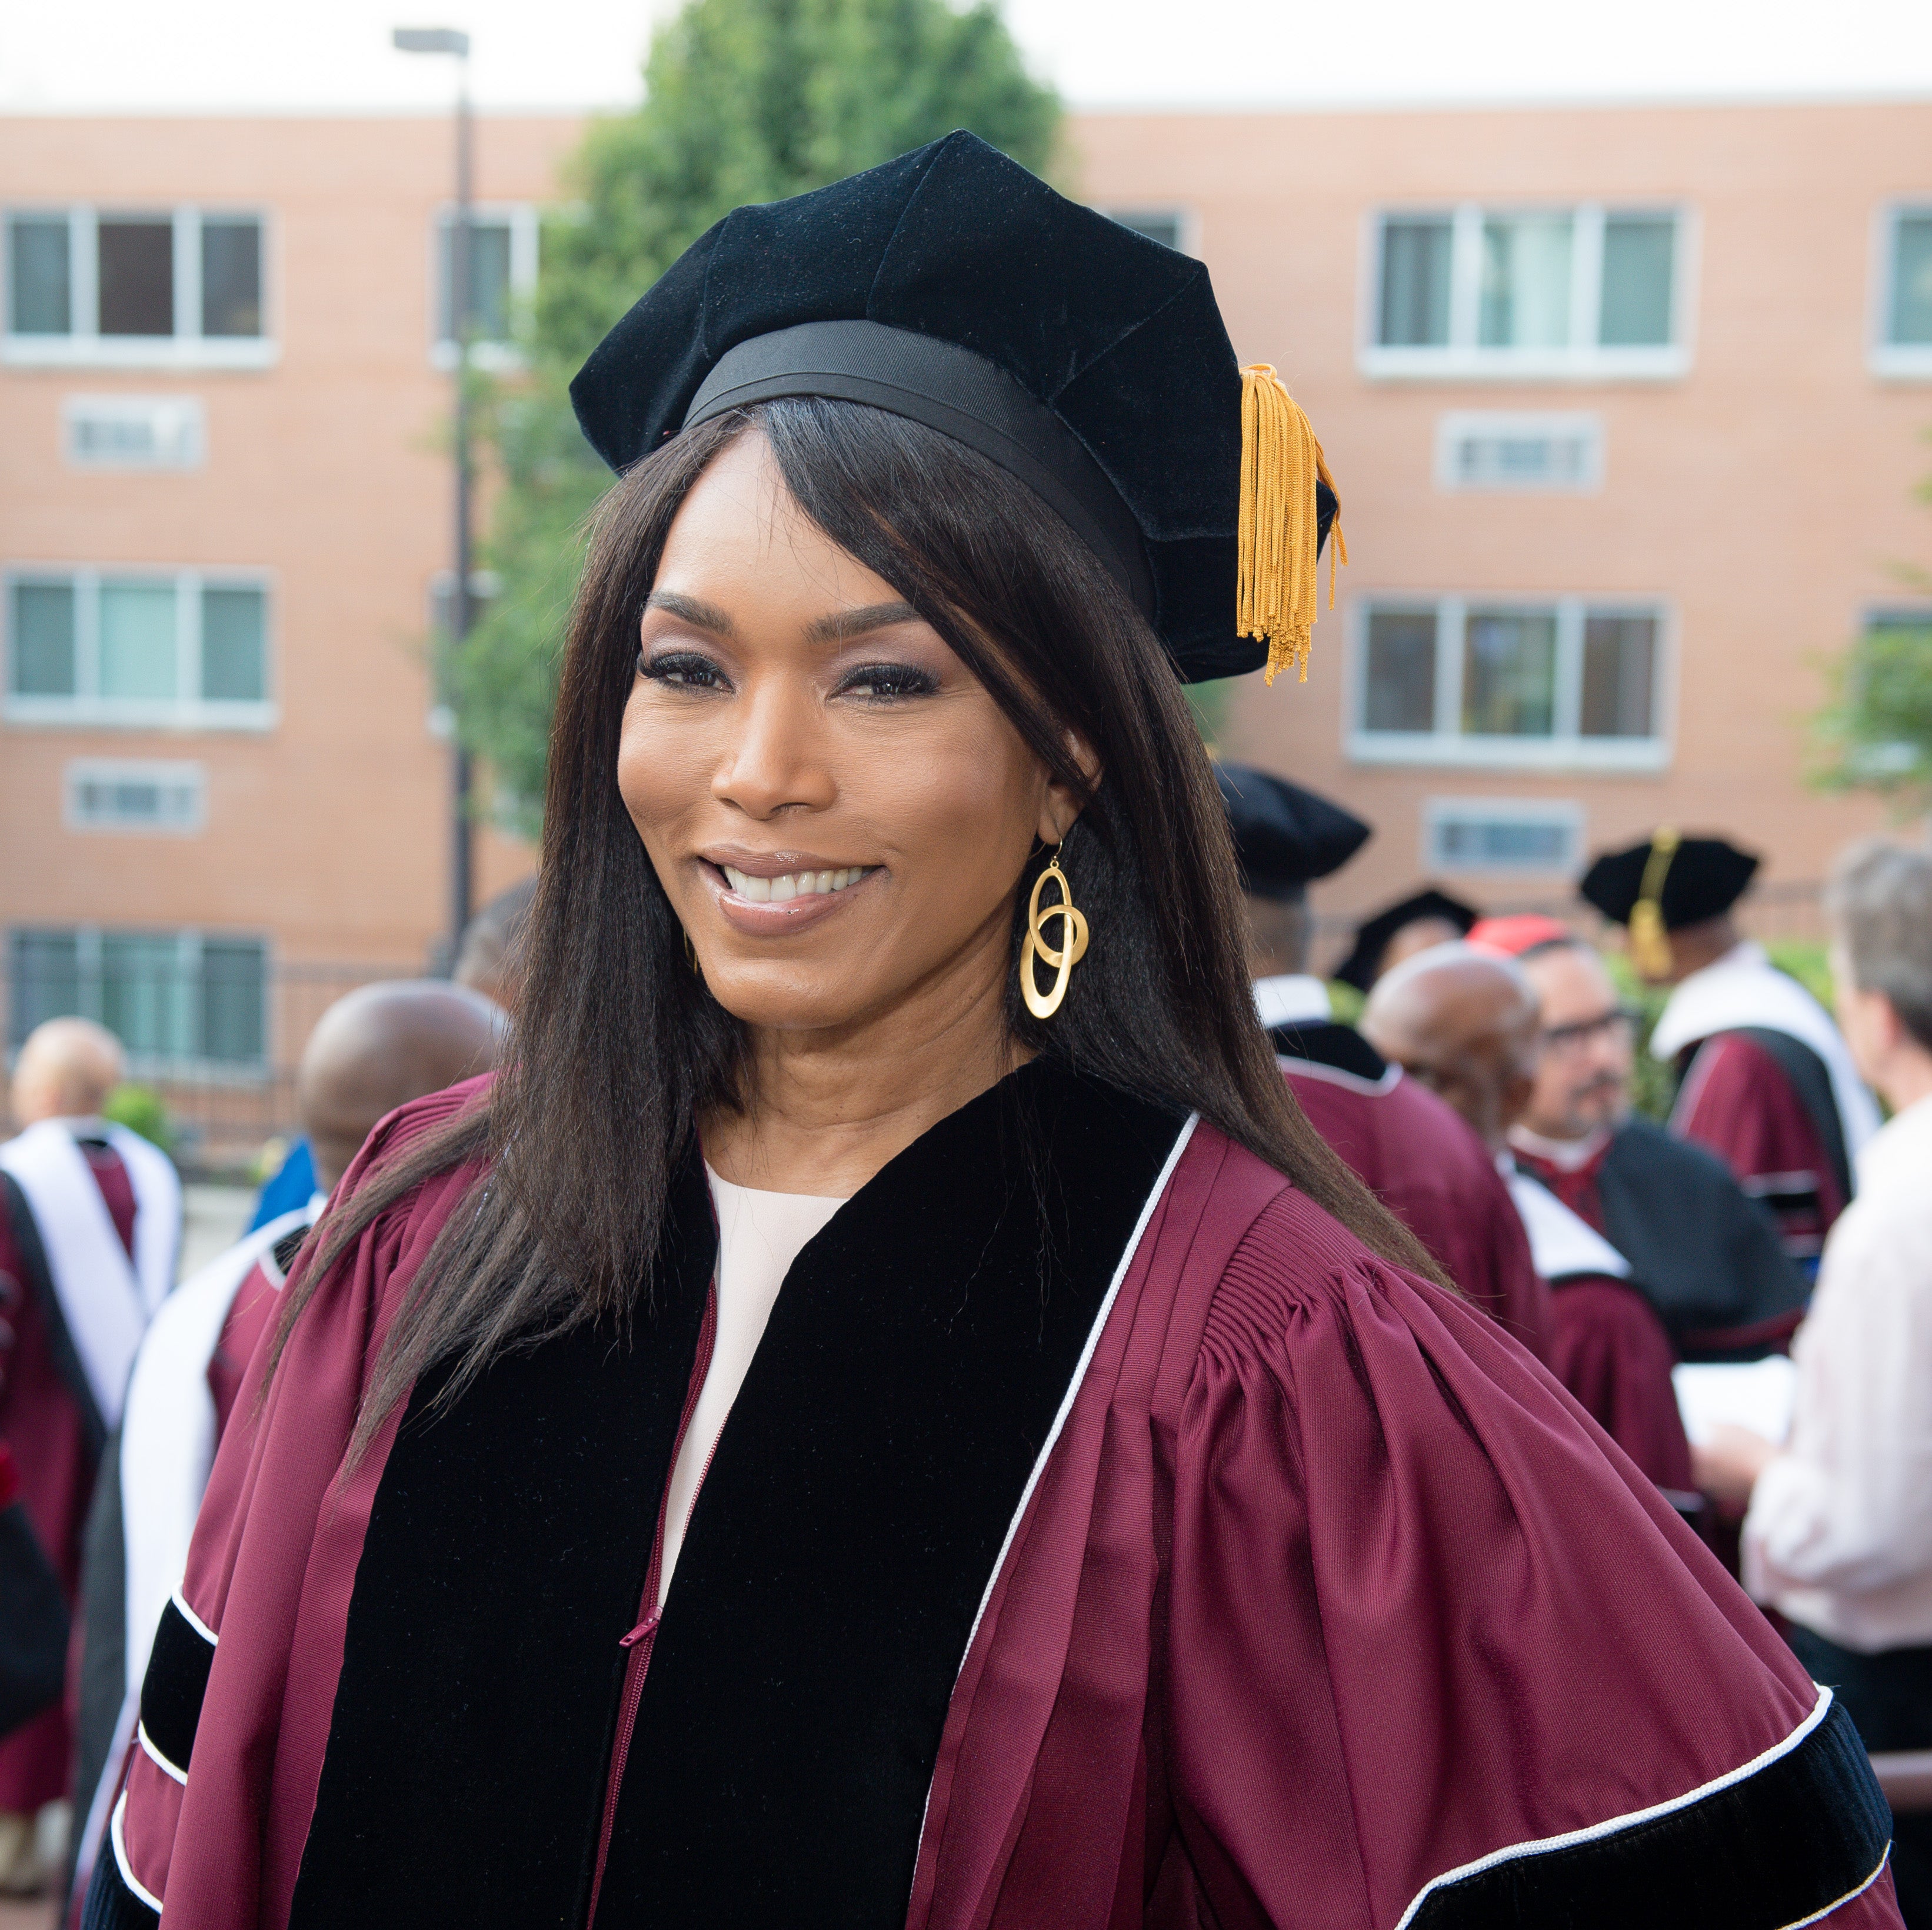 13 Times Angela Bassett Reminded Us Why She's Muva To This Beauty Game